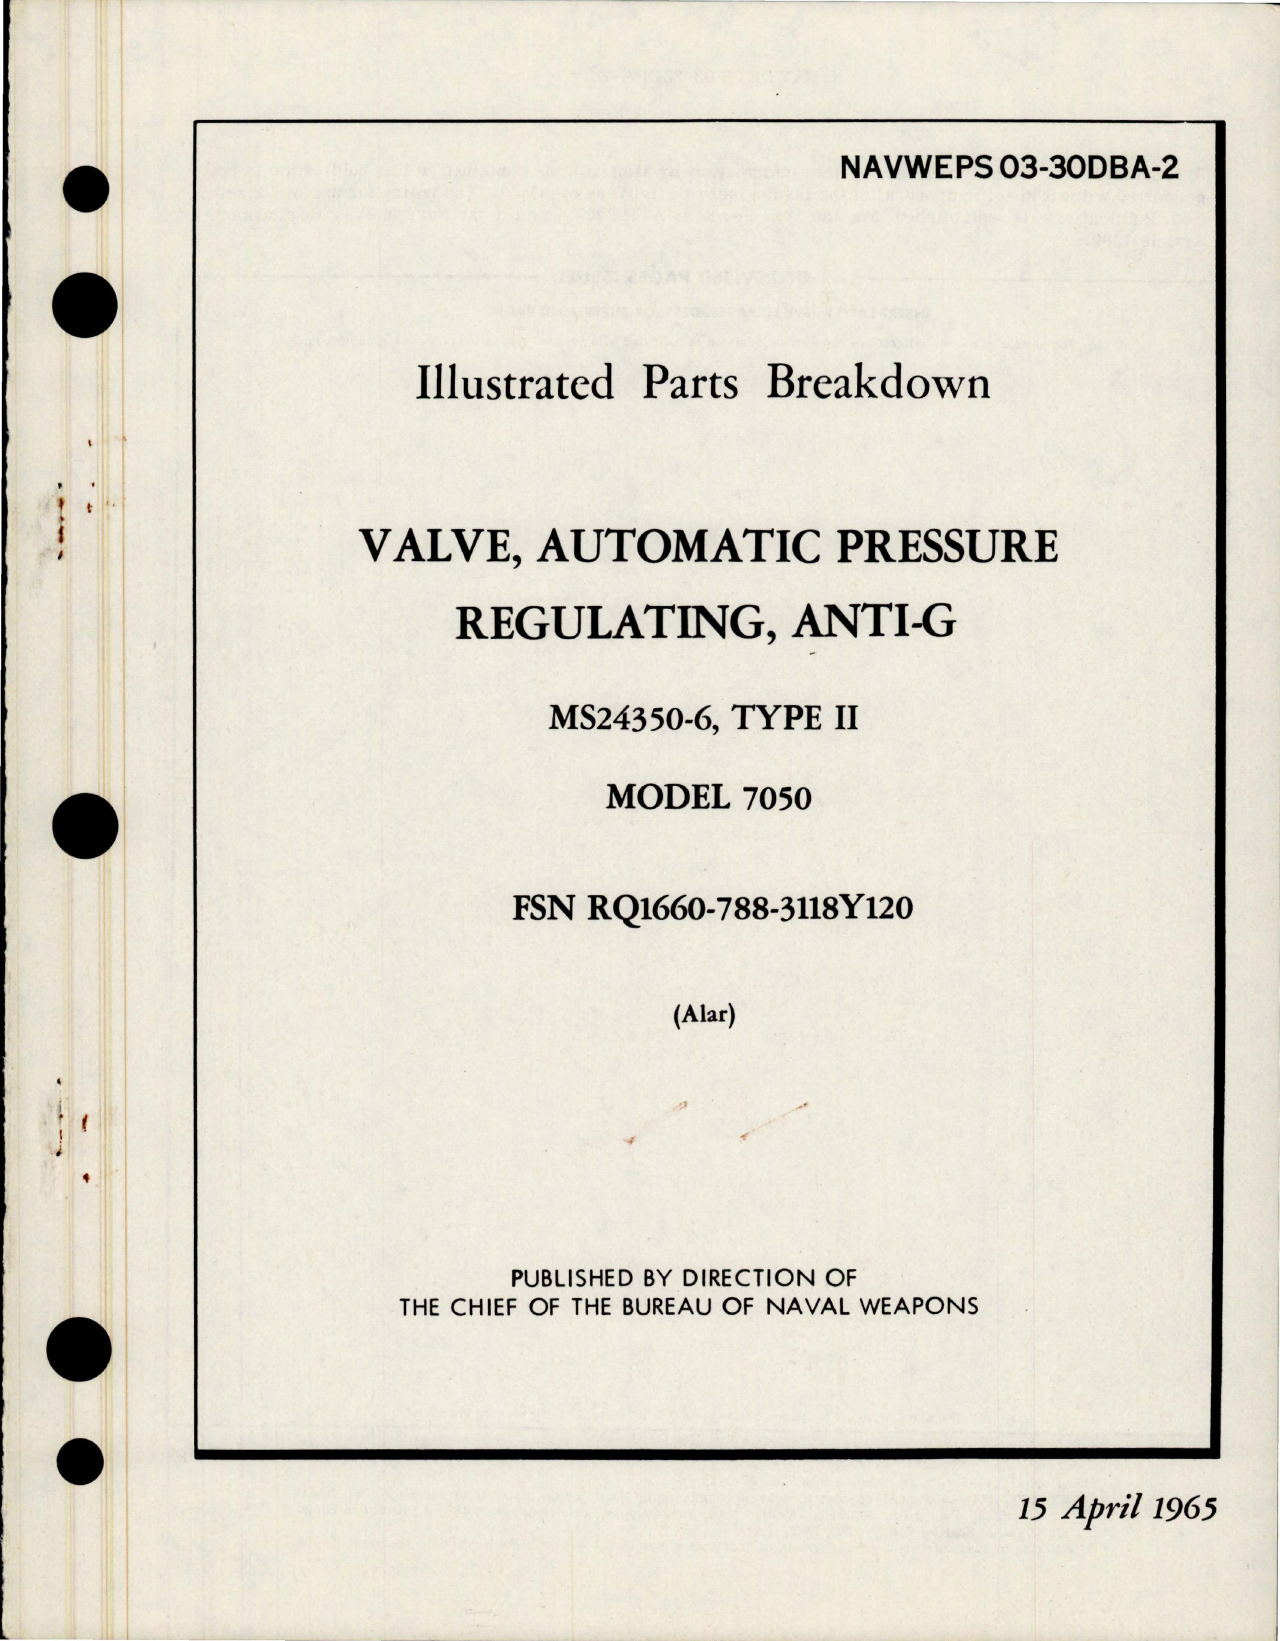 Sample page 1 from AirCorps Library document: Illustrated Parts Breakdown for Automatic Pressure Regulating Anti-G Valve - MS24350-6, Type II - Model 7050